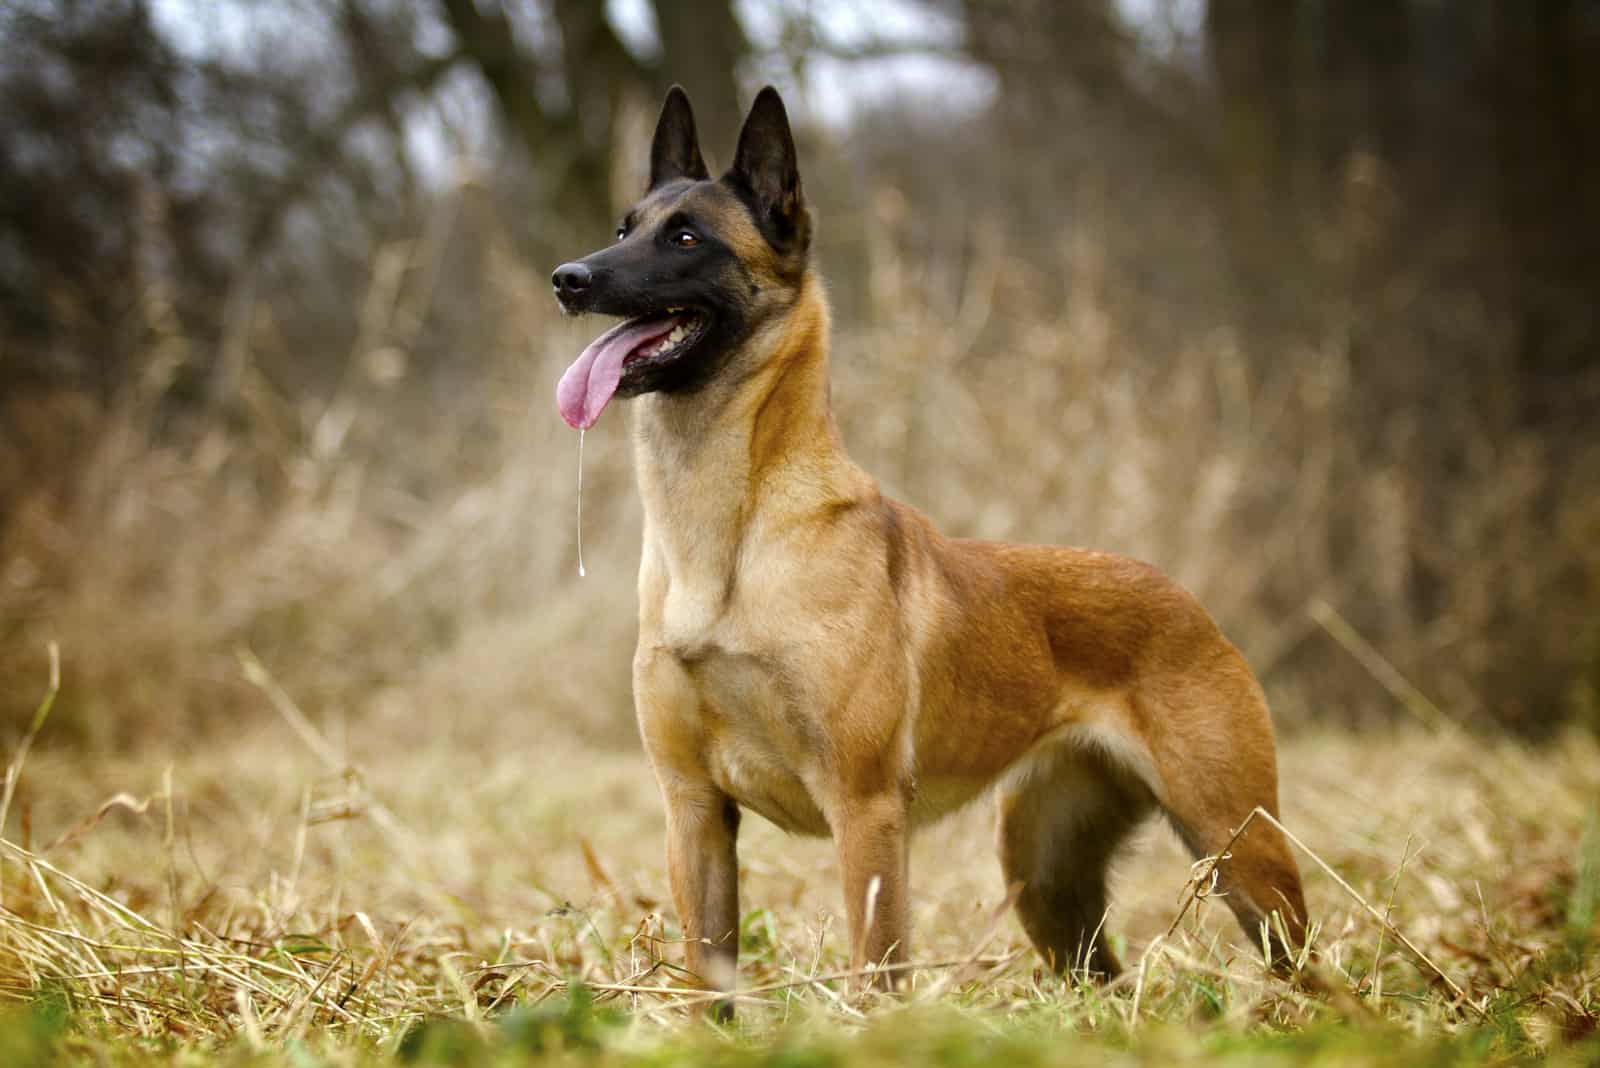 All Belgian Malinois Colors Explained – What Colors Are Up To The Breed Standard?